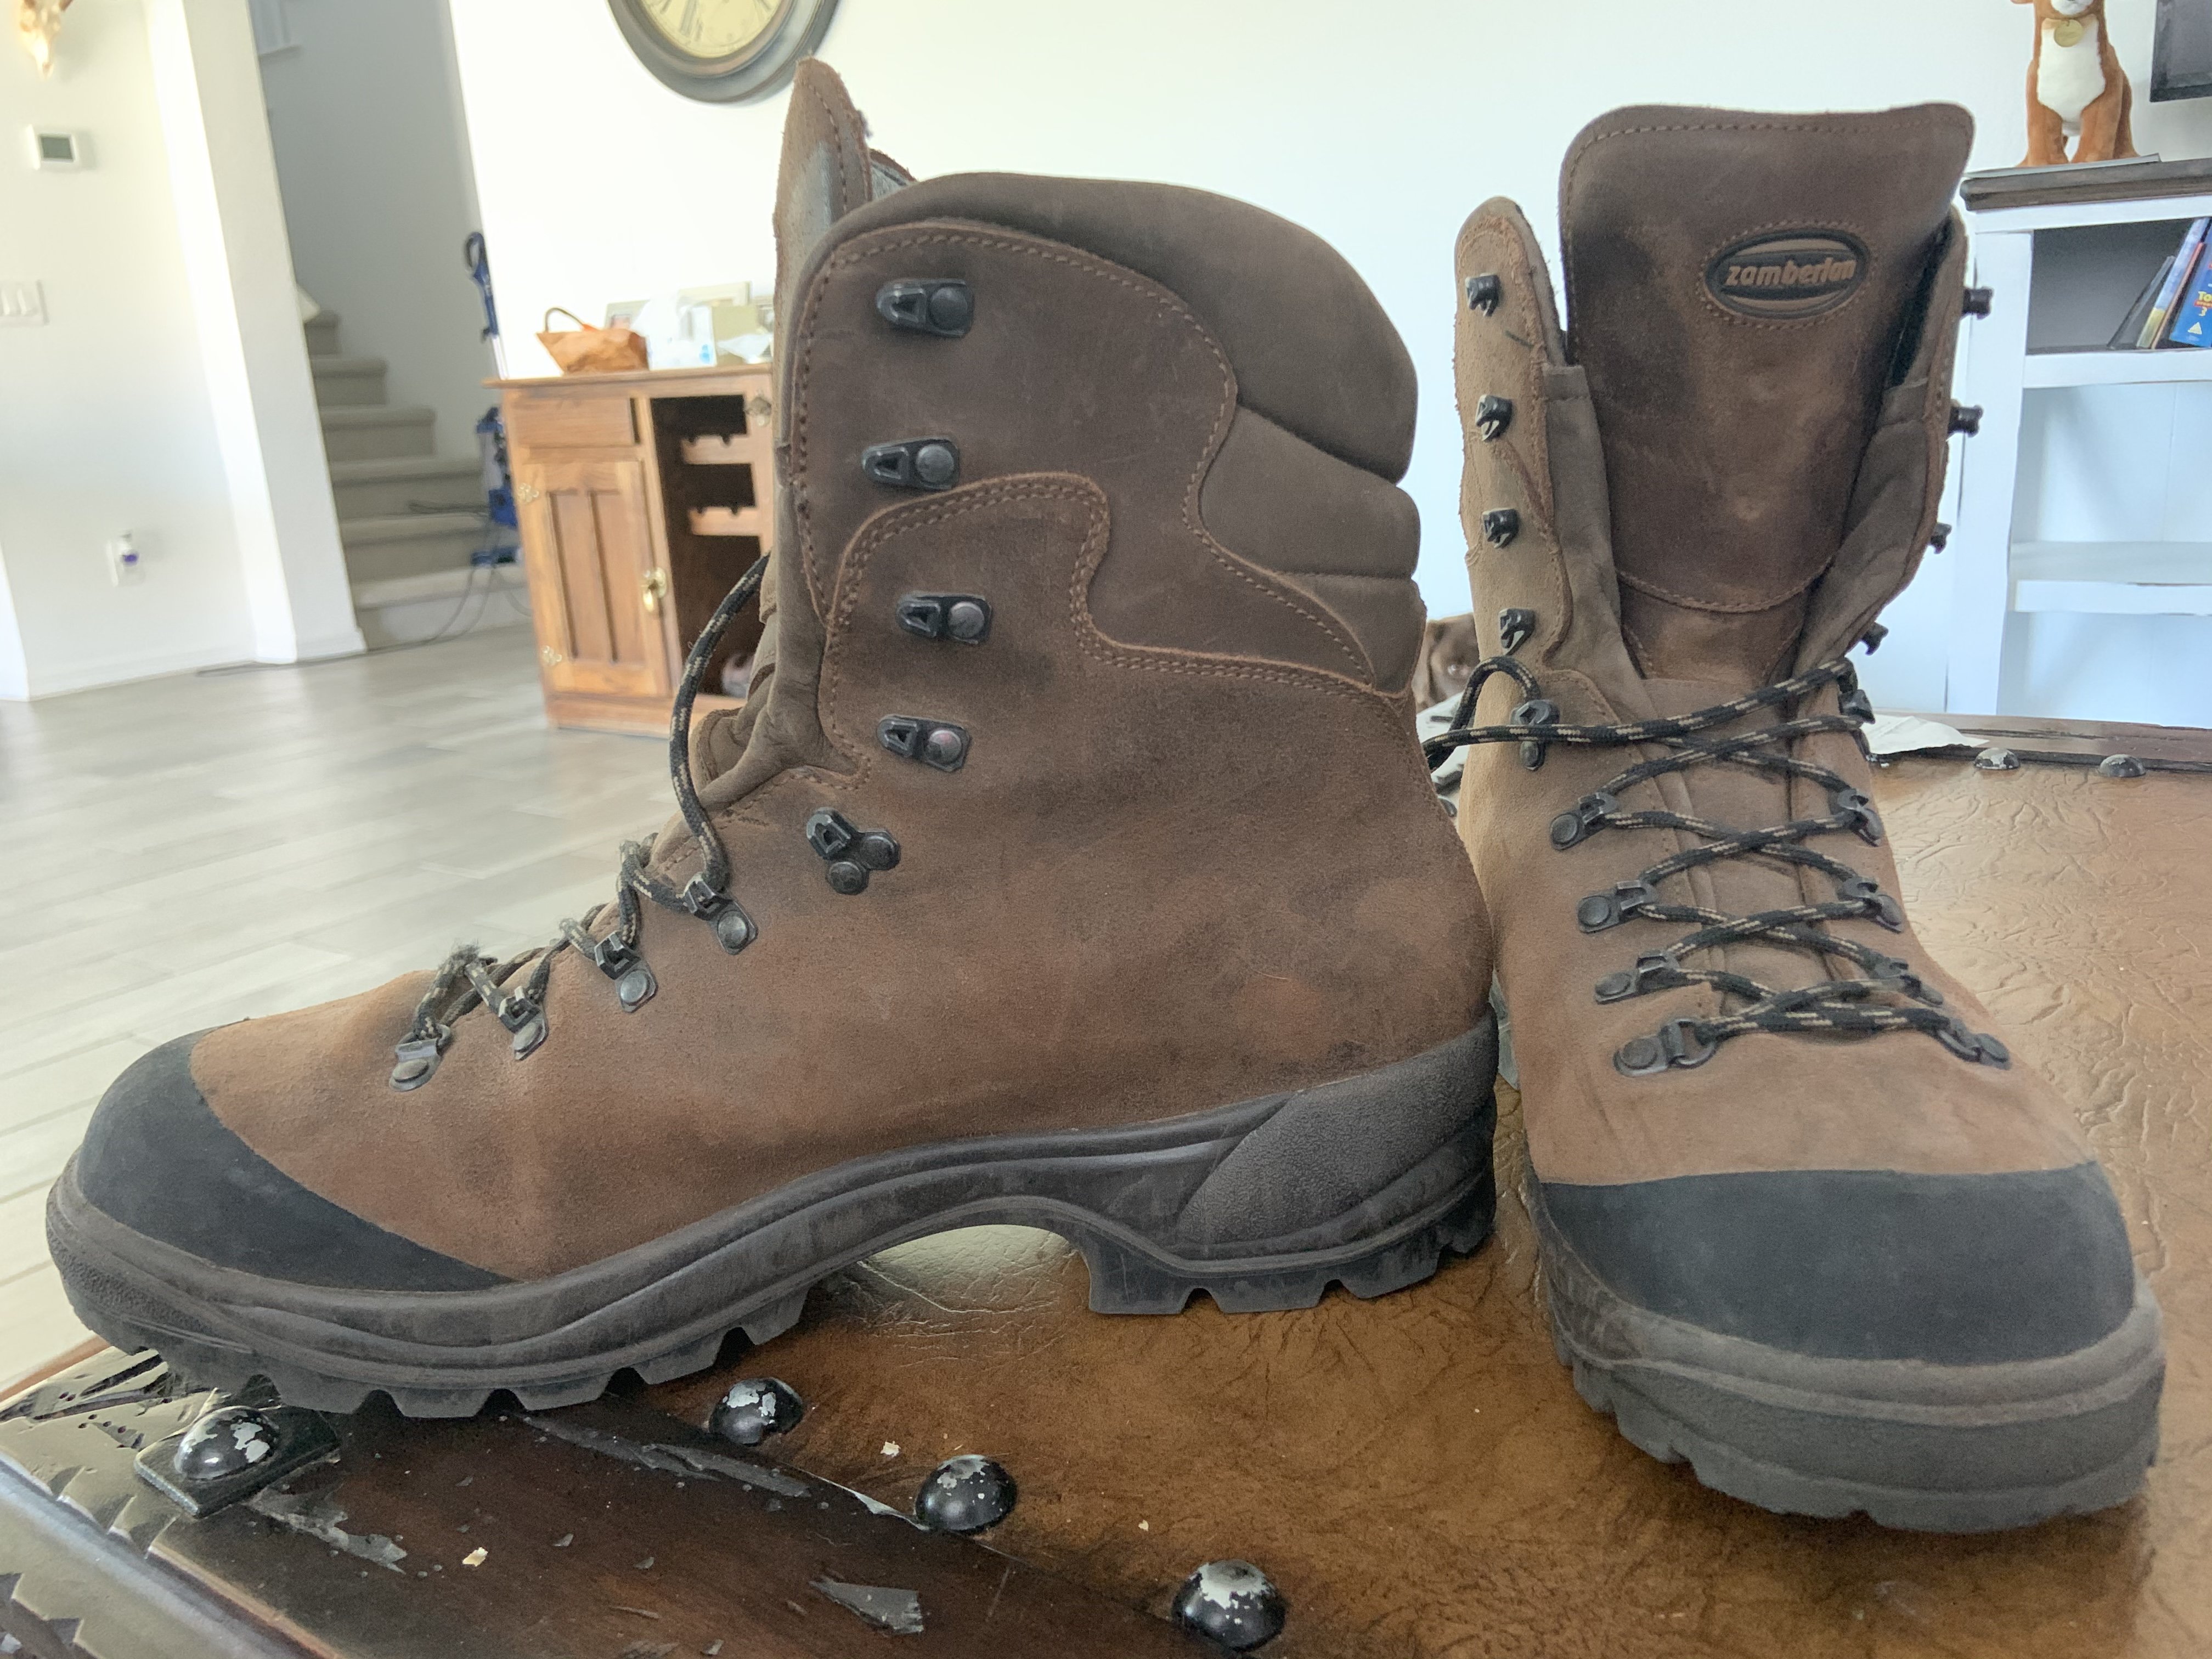 Zamberlan Boots - Classified Ads - CouesWhitetail.com Discussion forum